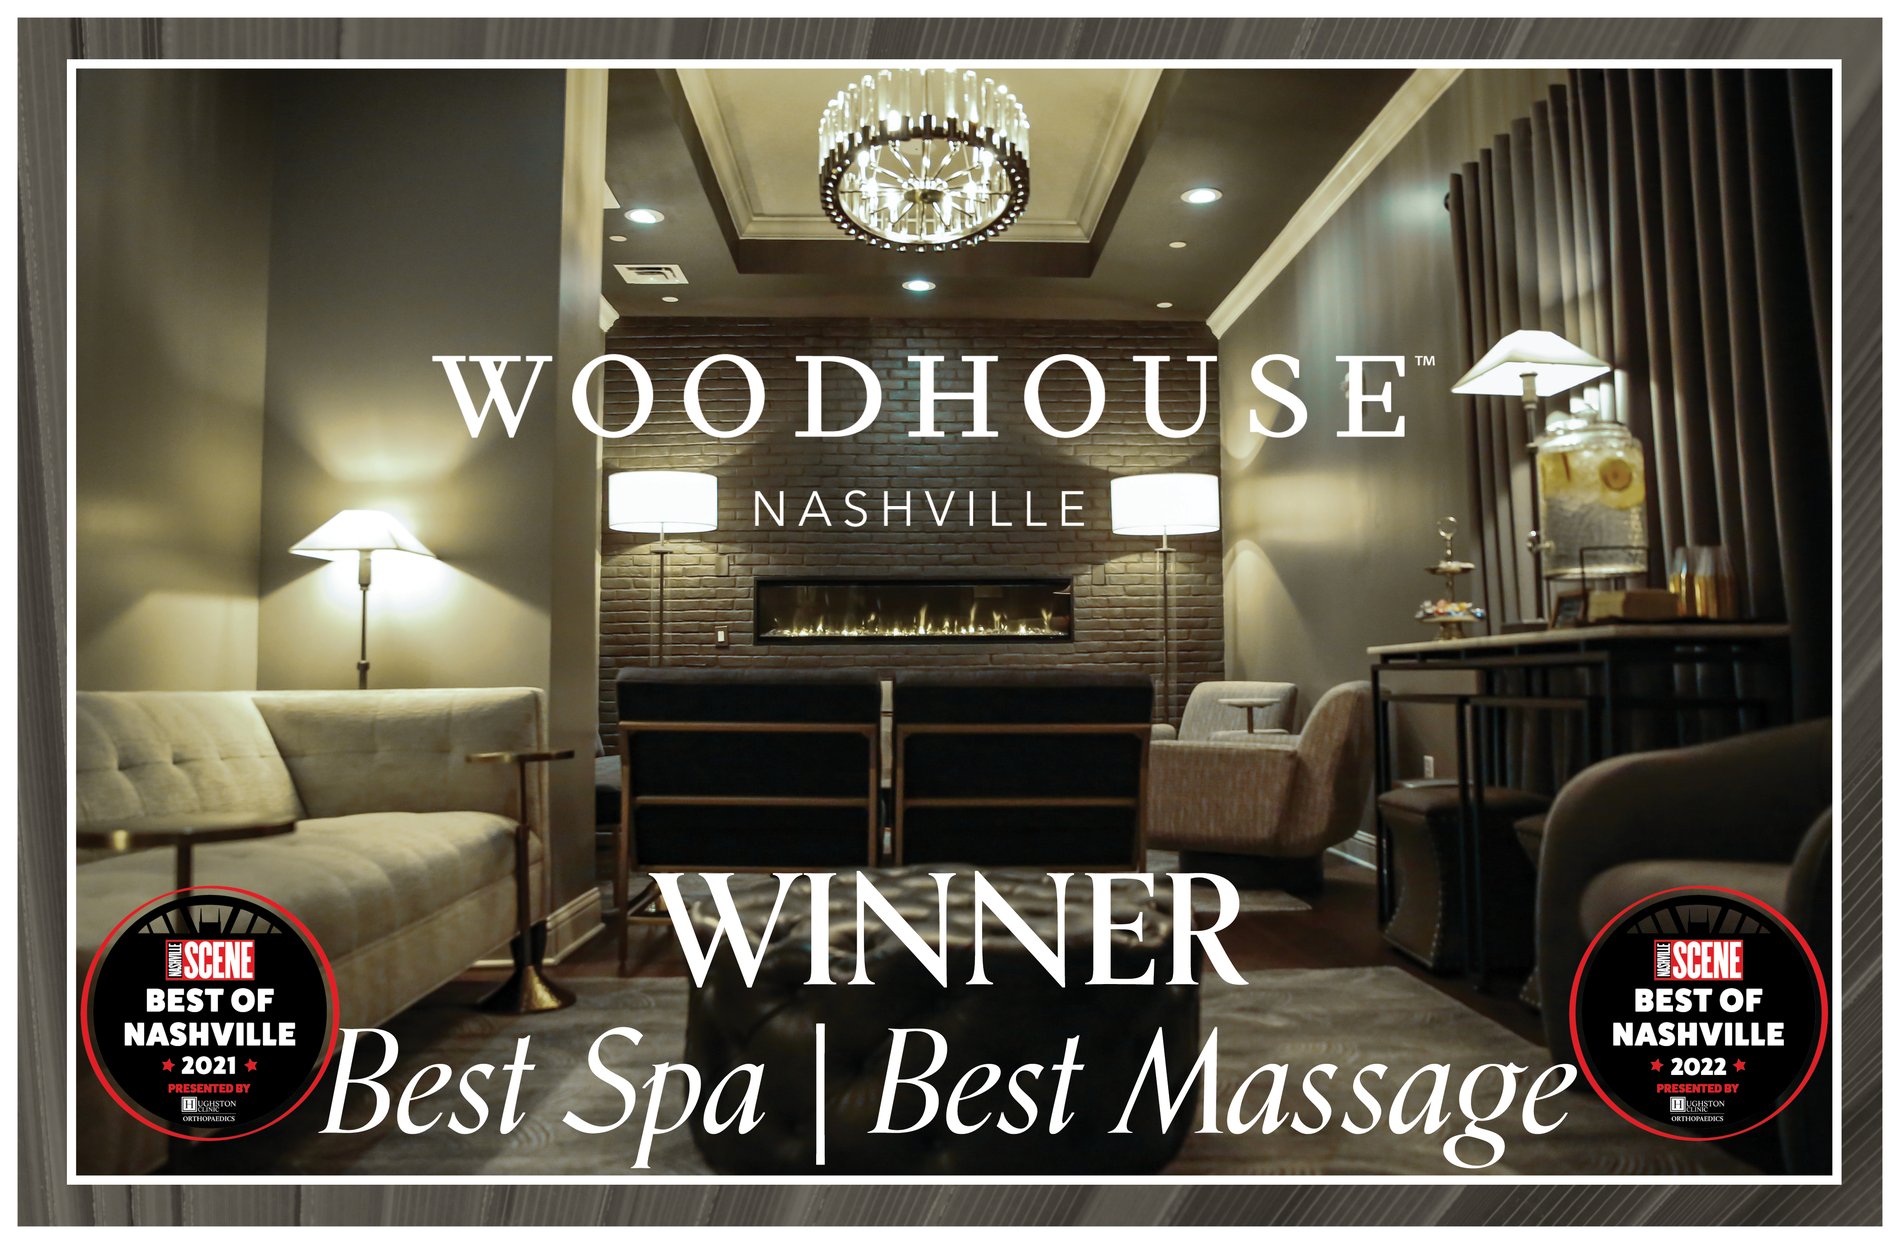 Voted Best Spa and Best Massage by Nashville Scene, 2022 and 2021